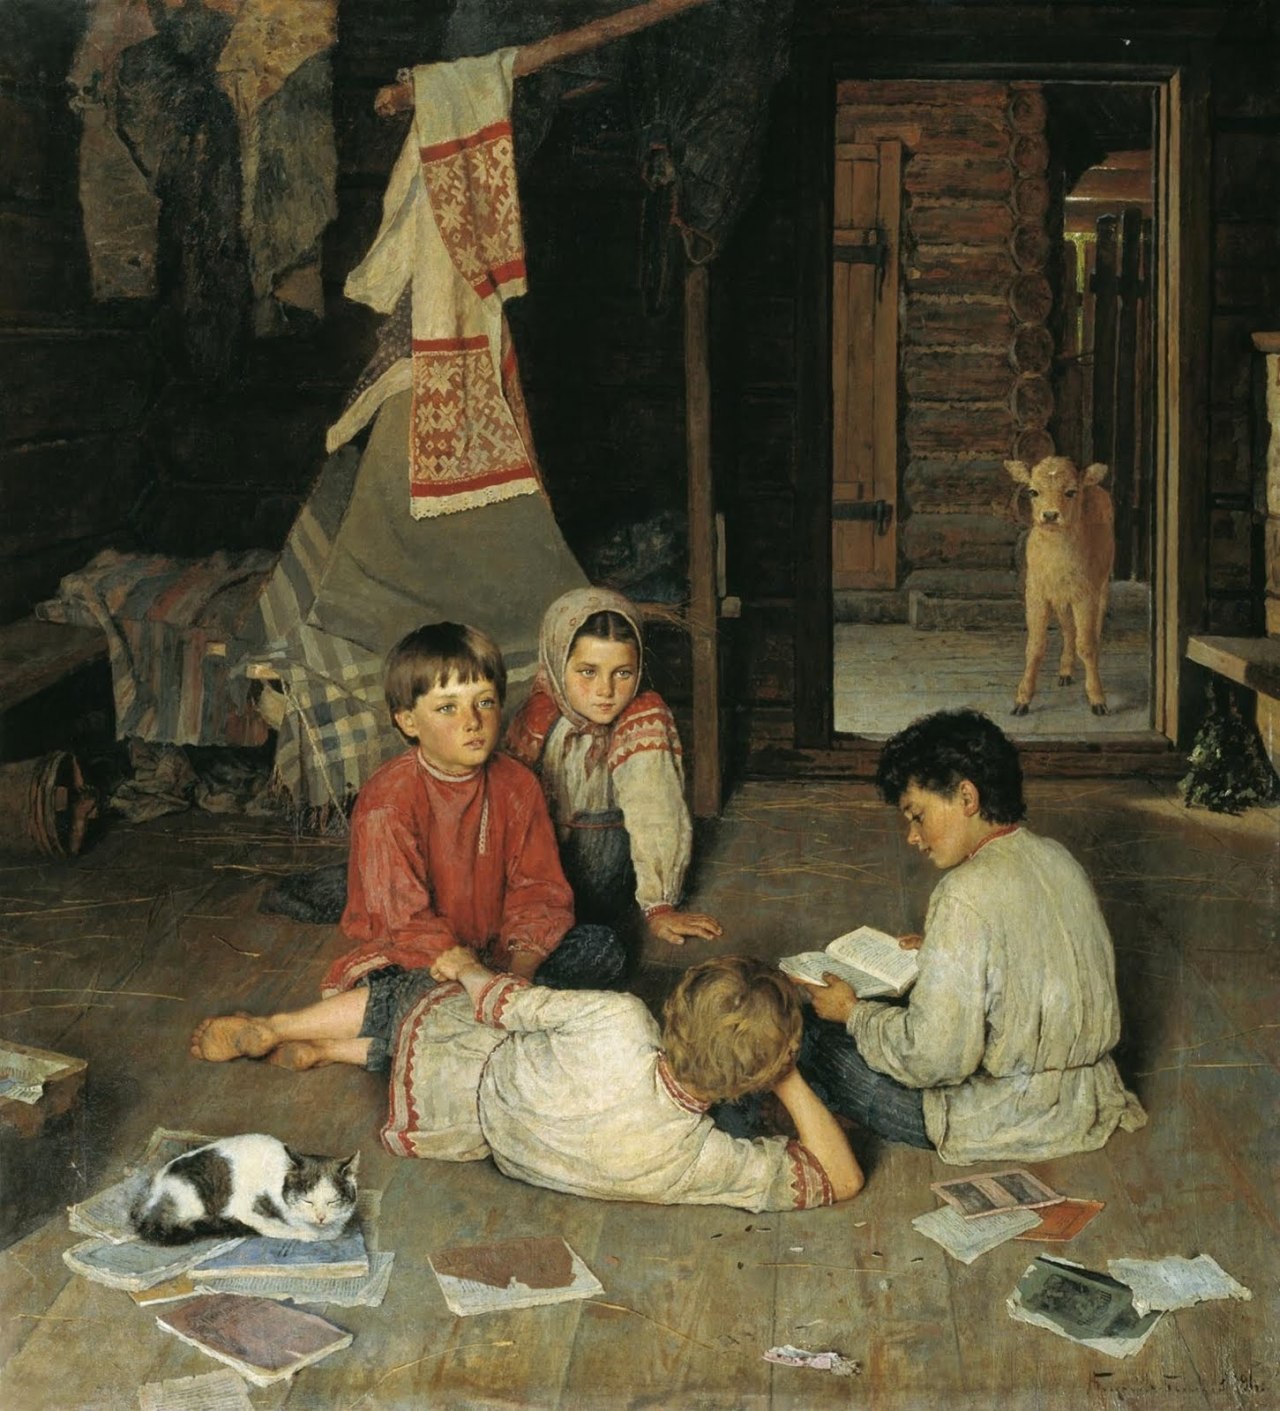 New Fairy Tale (1891). Nikolay Bogdanov-Belsky (Russian 1868-1945). Oil on canvas. National Arts Museum of the Republic of Belarus.
Bogdanov-Belsky was fascinated by the activities of children. Here, the group of four read aloud and listen to the new...